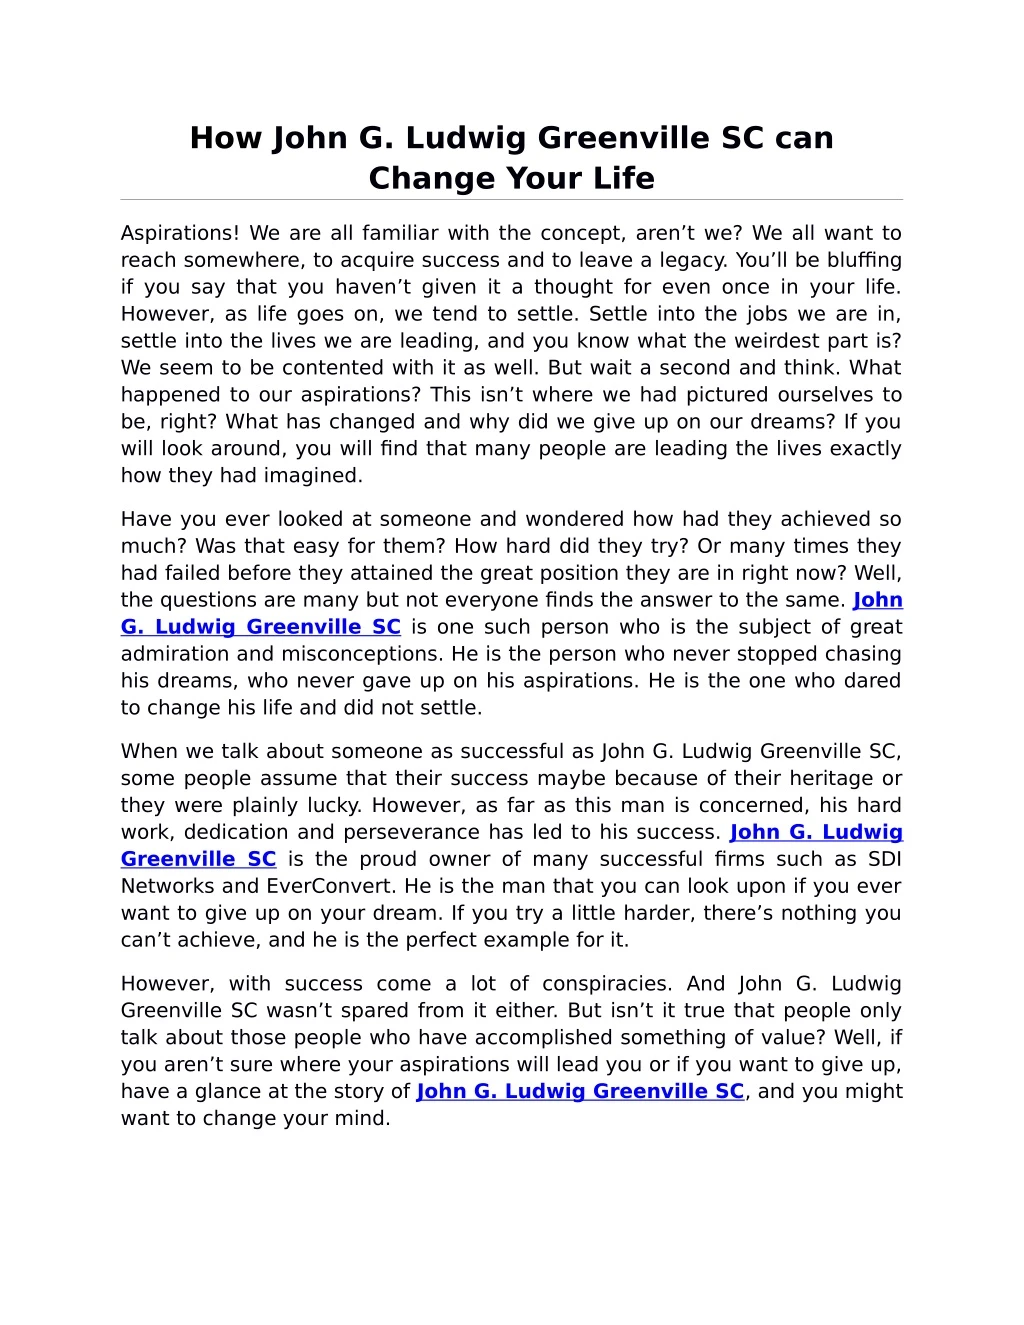 how john g ludwig greenville sc can change your